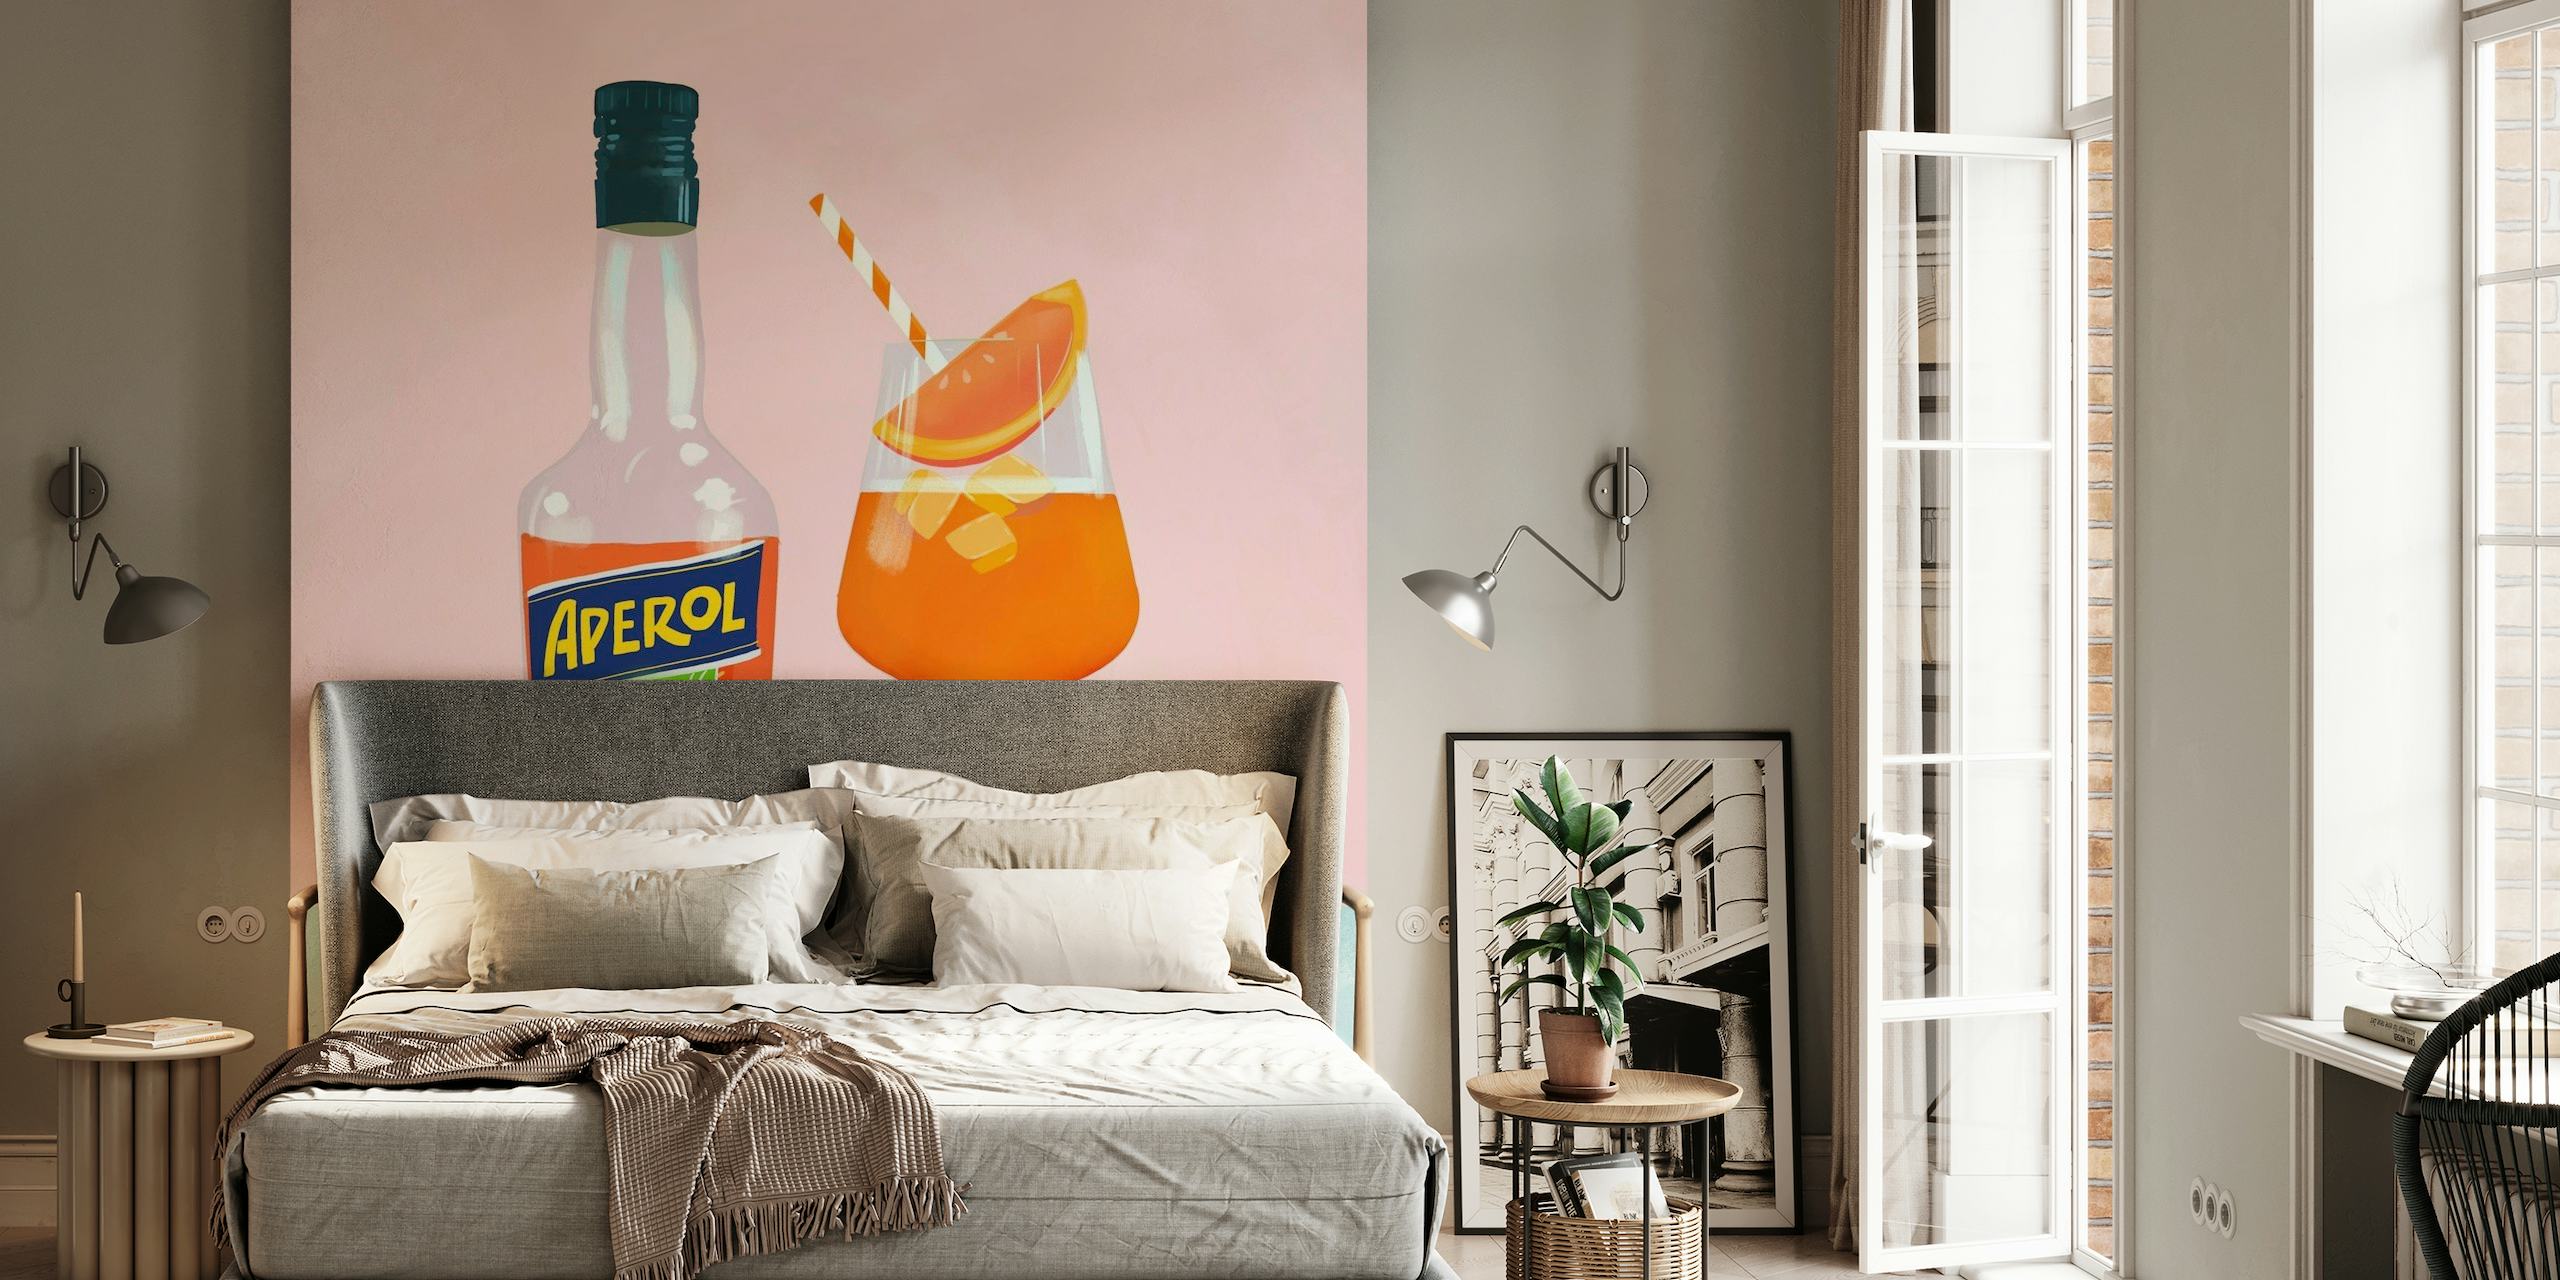 Aperol Spritz wall mural with bottle and cocktail glass against a pink background